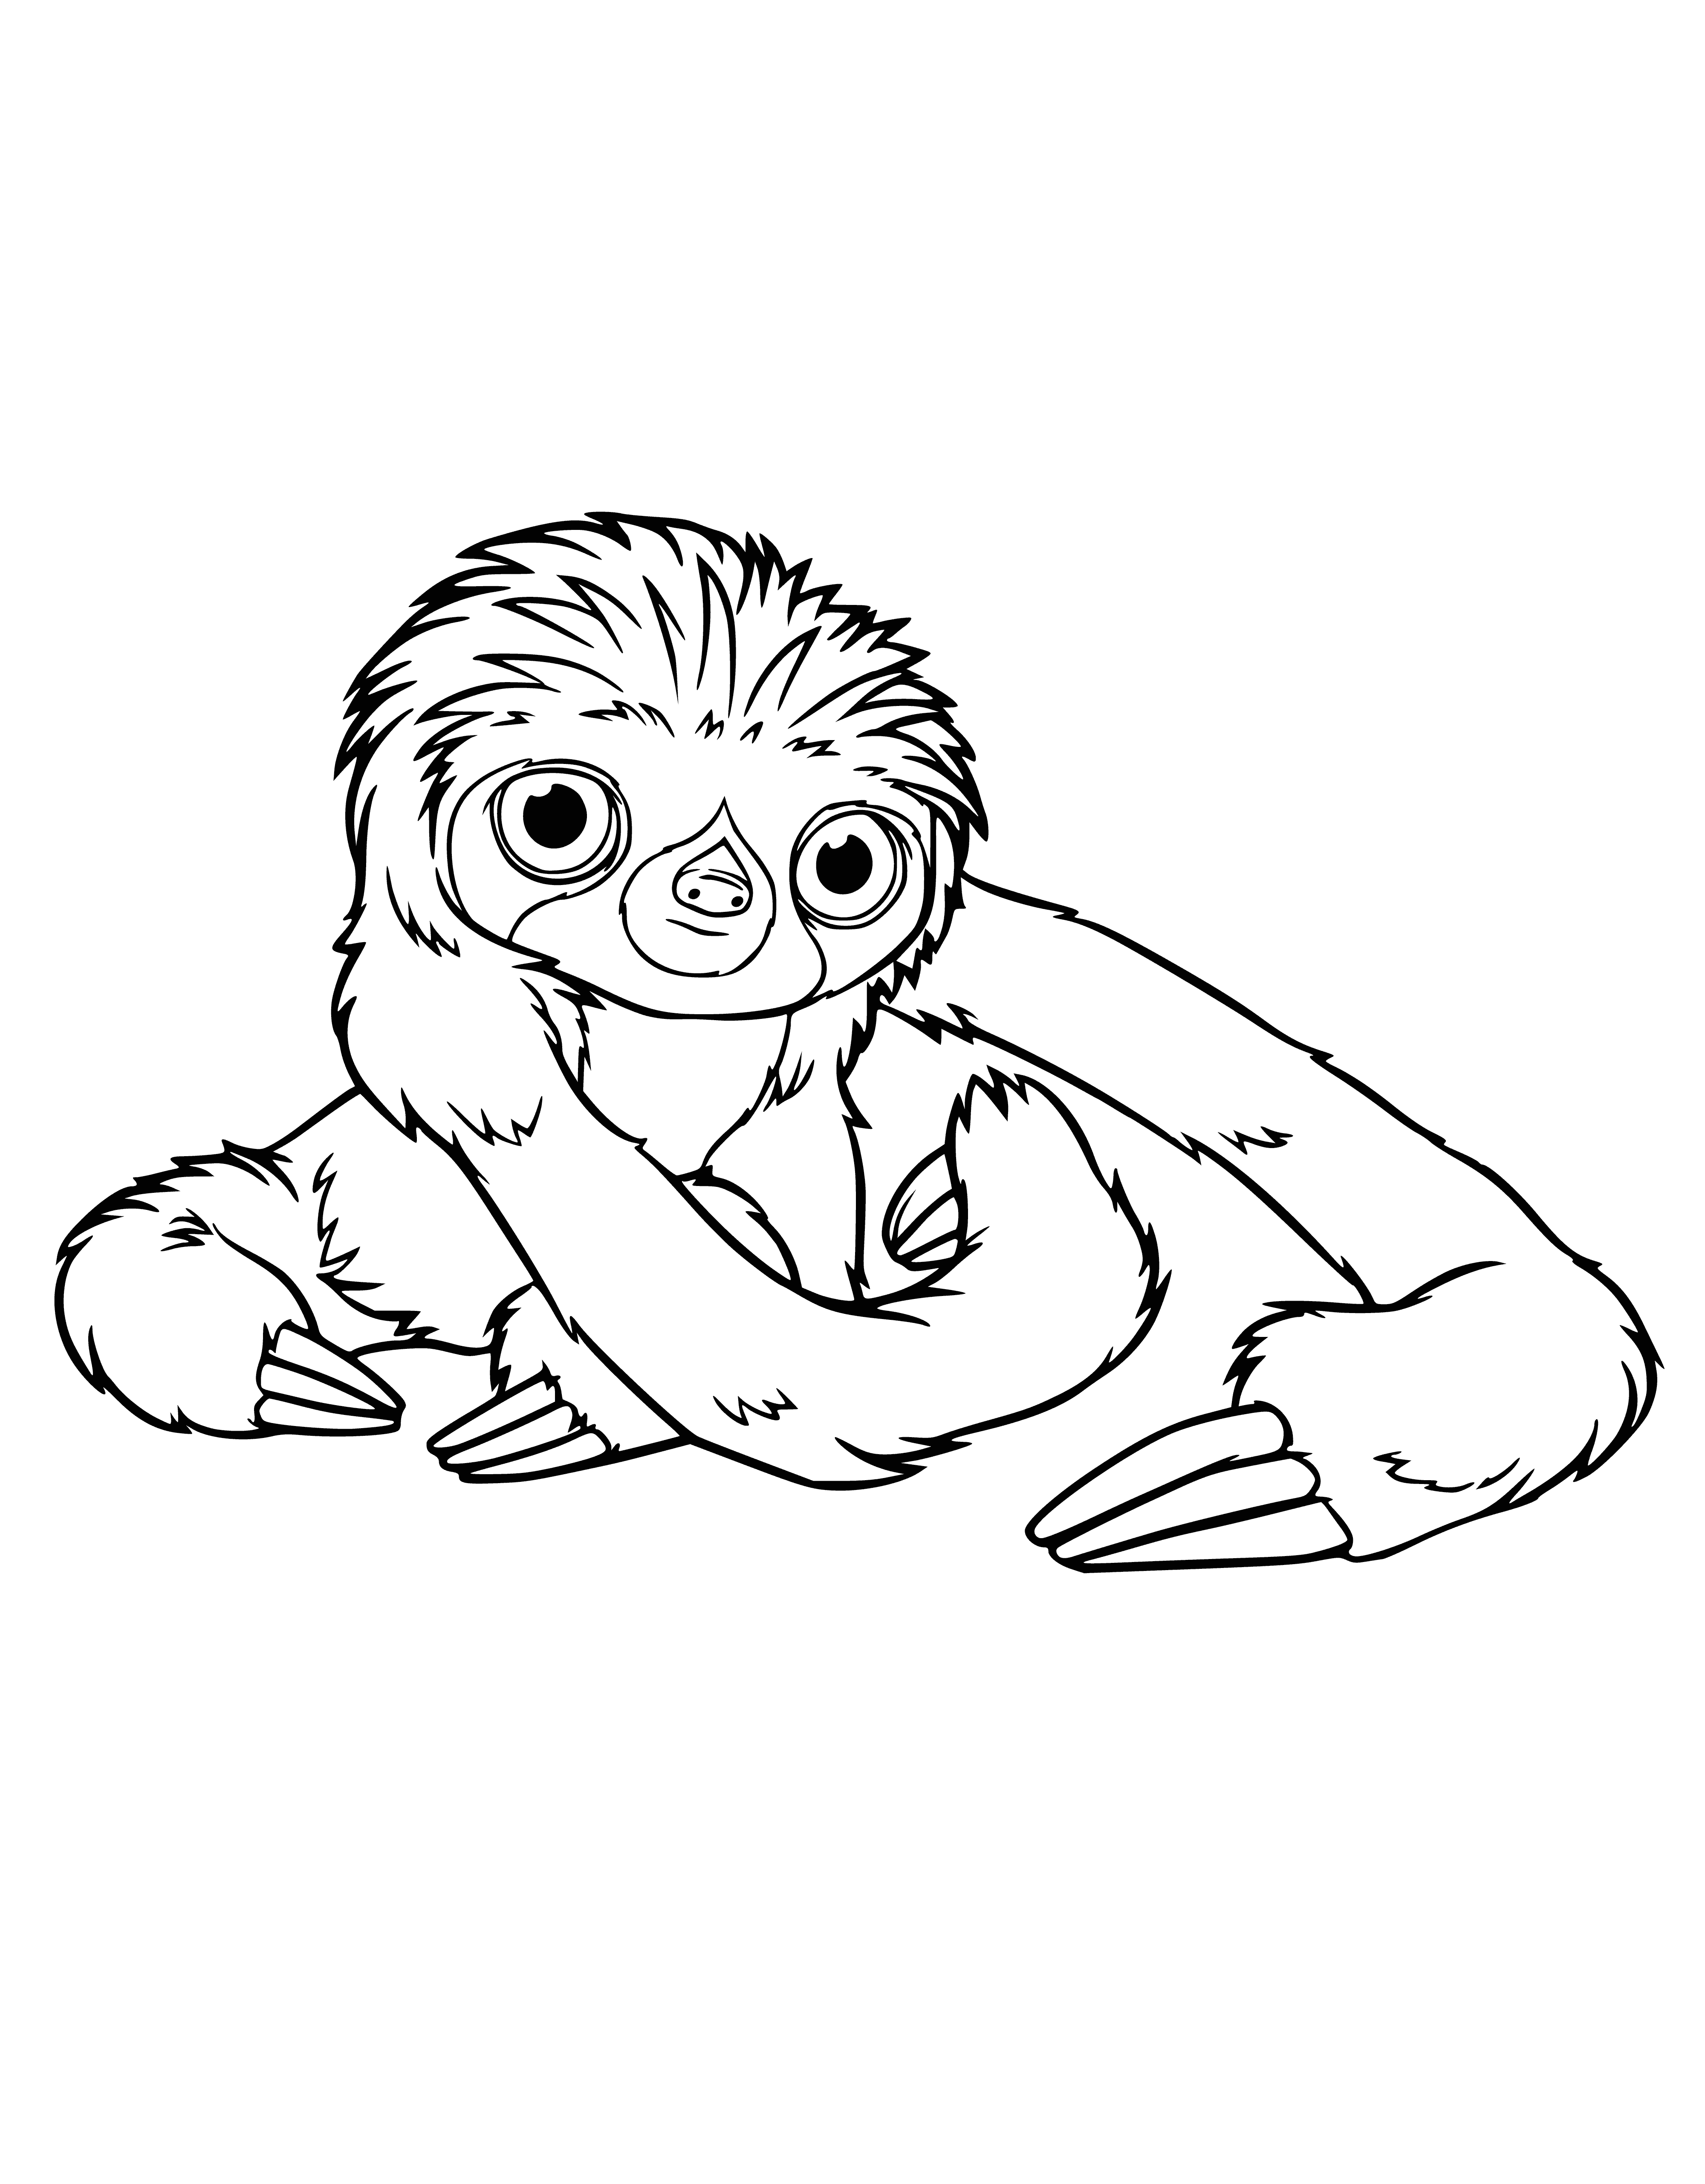 coloring page: A small pet w/fur mostly brown & white patches, black eyes & a long tail; known as the Croods' Sash - Pet of the Small.